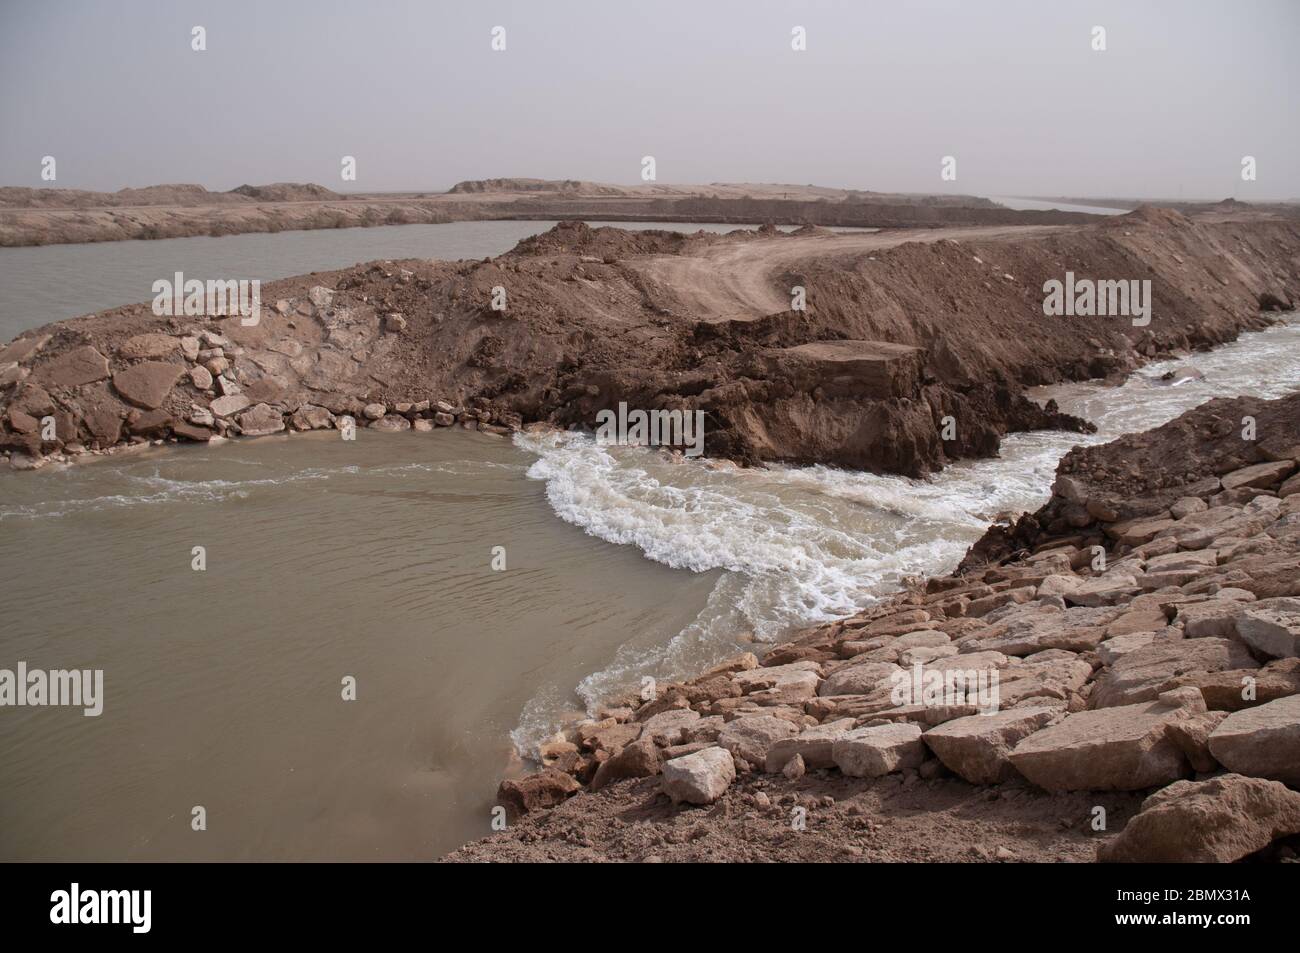 water rushes through a breached dam in Southern Iraq,  the dam was constructed by Saddam Hussein to prevent water from flowing across the marshes in southern Iraq after the end of Gulf war 1 in 1991, from the Tigris river to the north  the Euphrates to the south.  The dam was breached after Saddam downfall as part of a restoration project to reflood the marshlands in 2010 Stock Photo